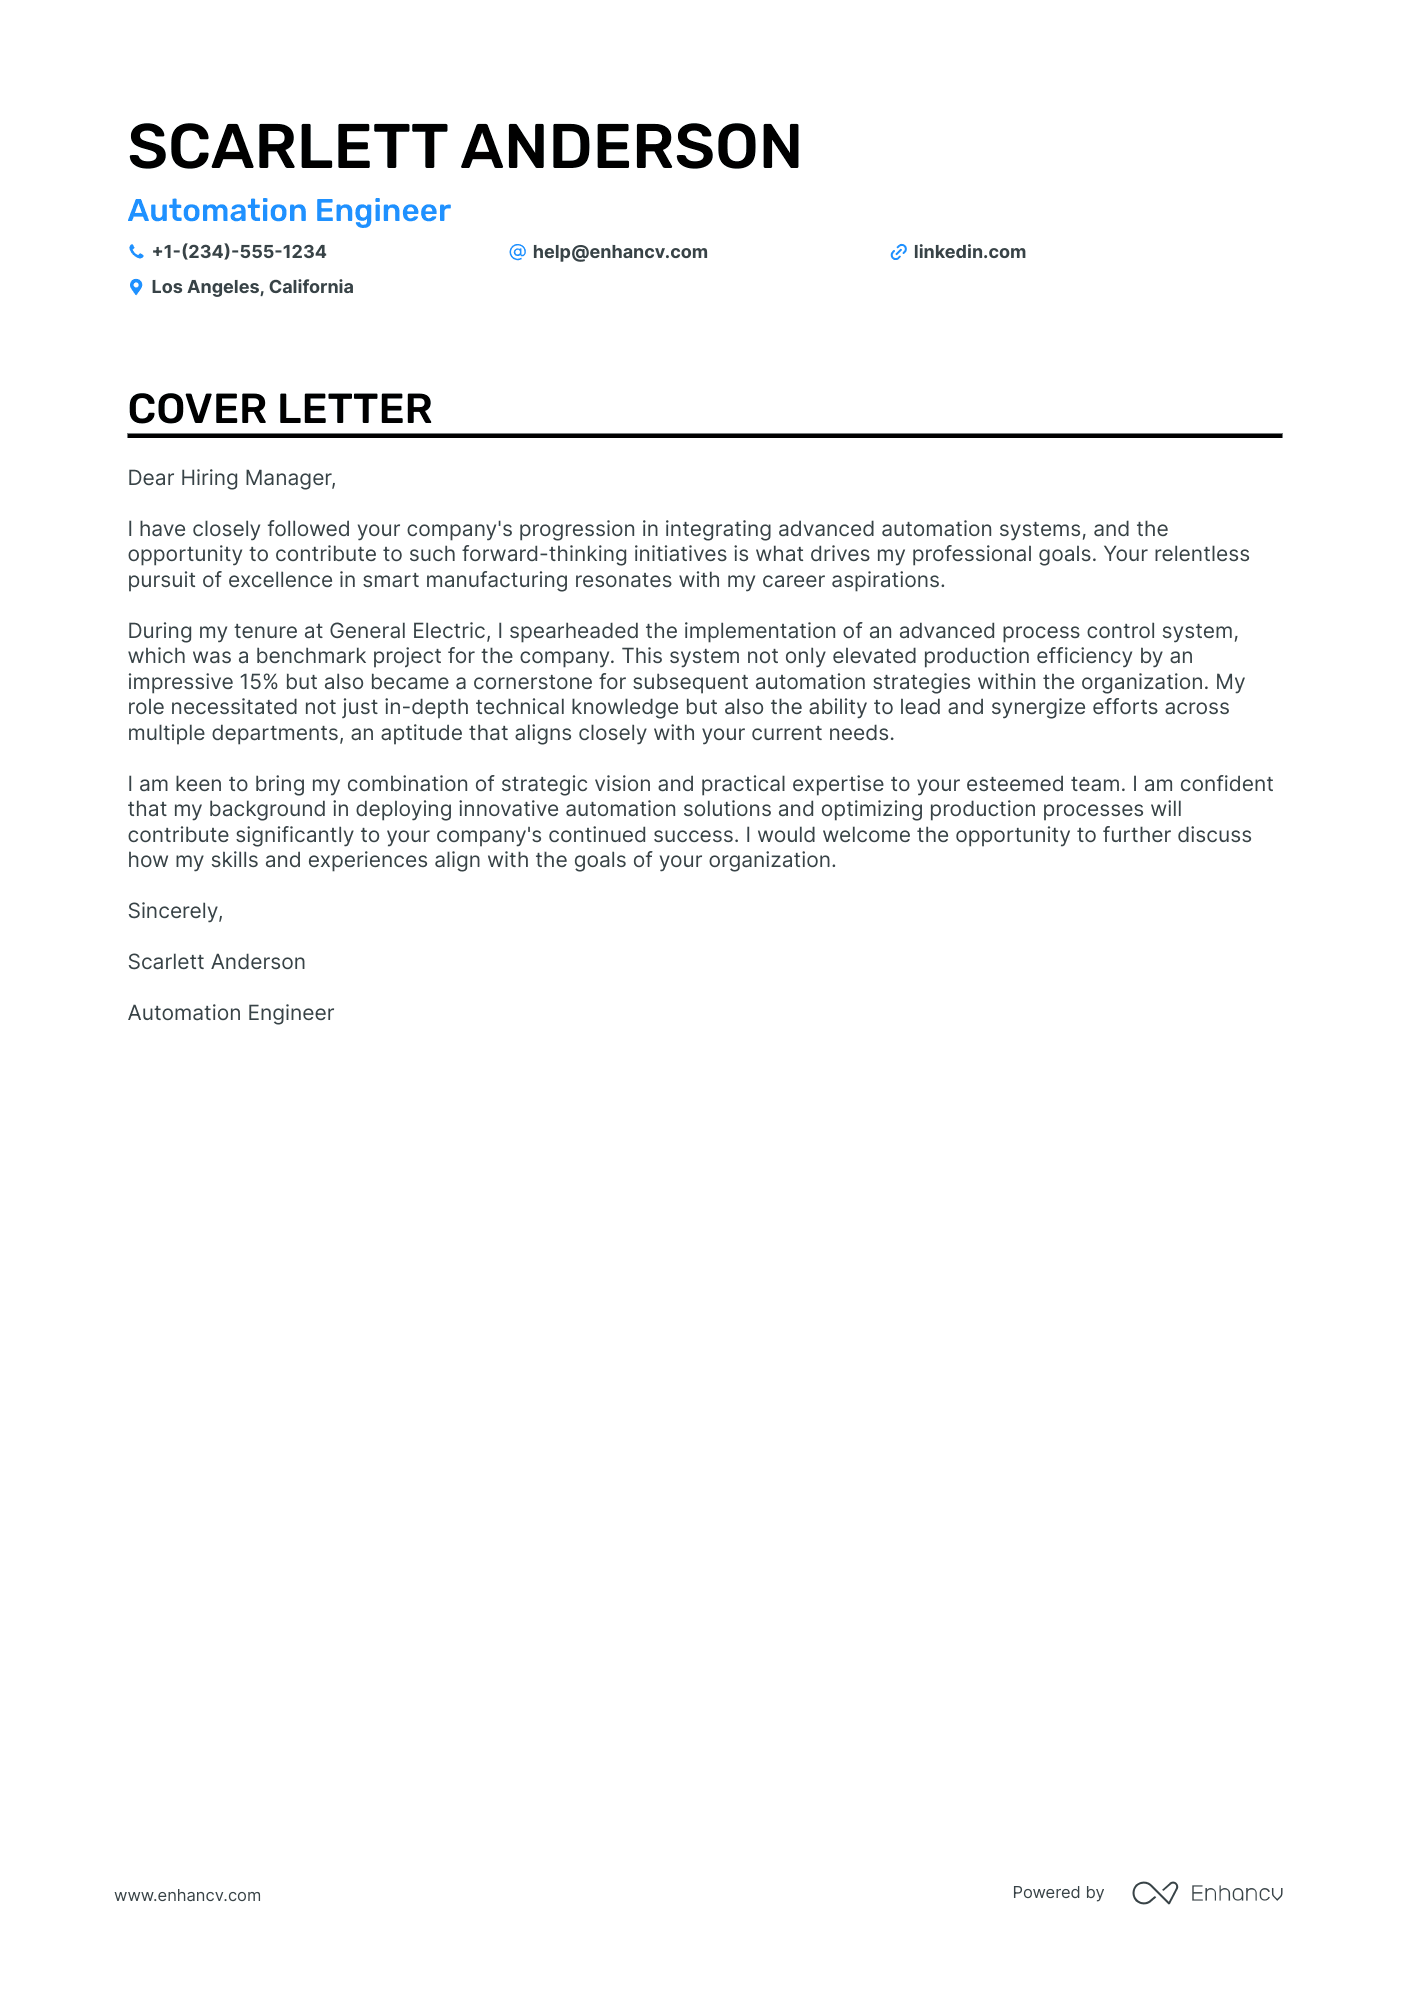 Control Systems Engineer cover letter